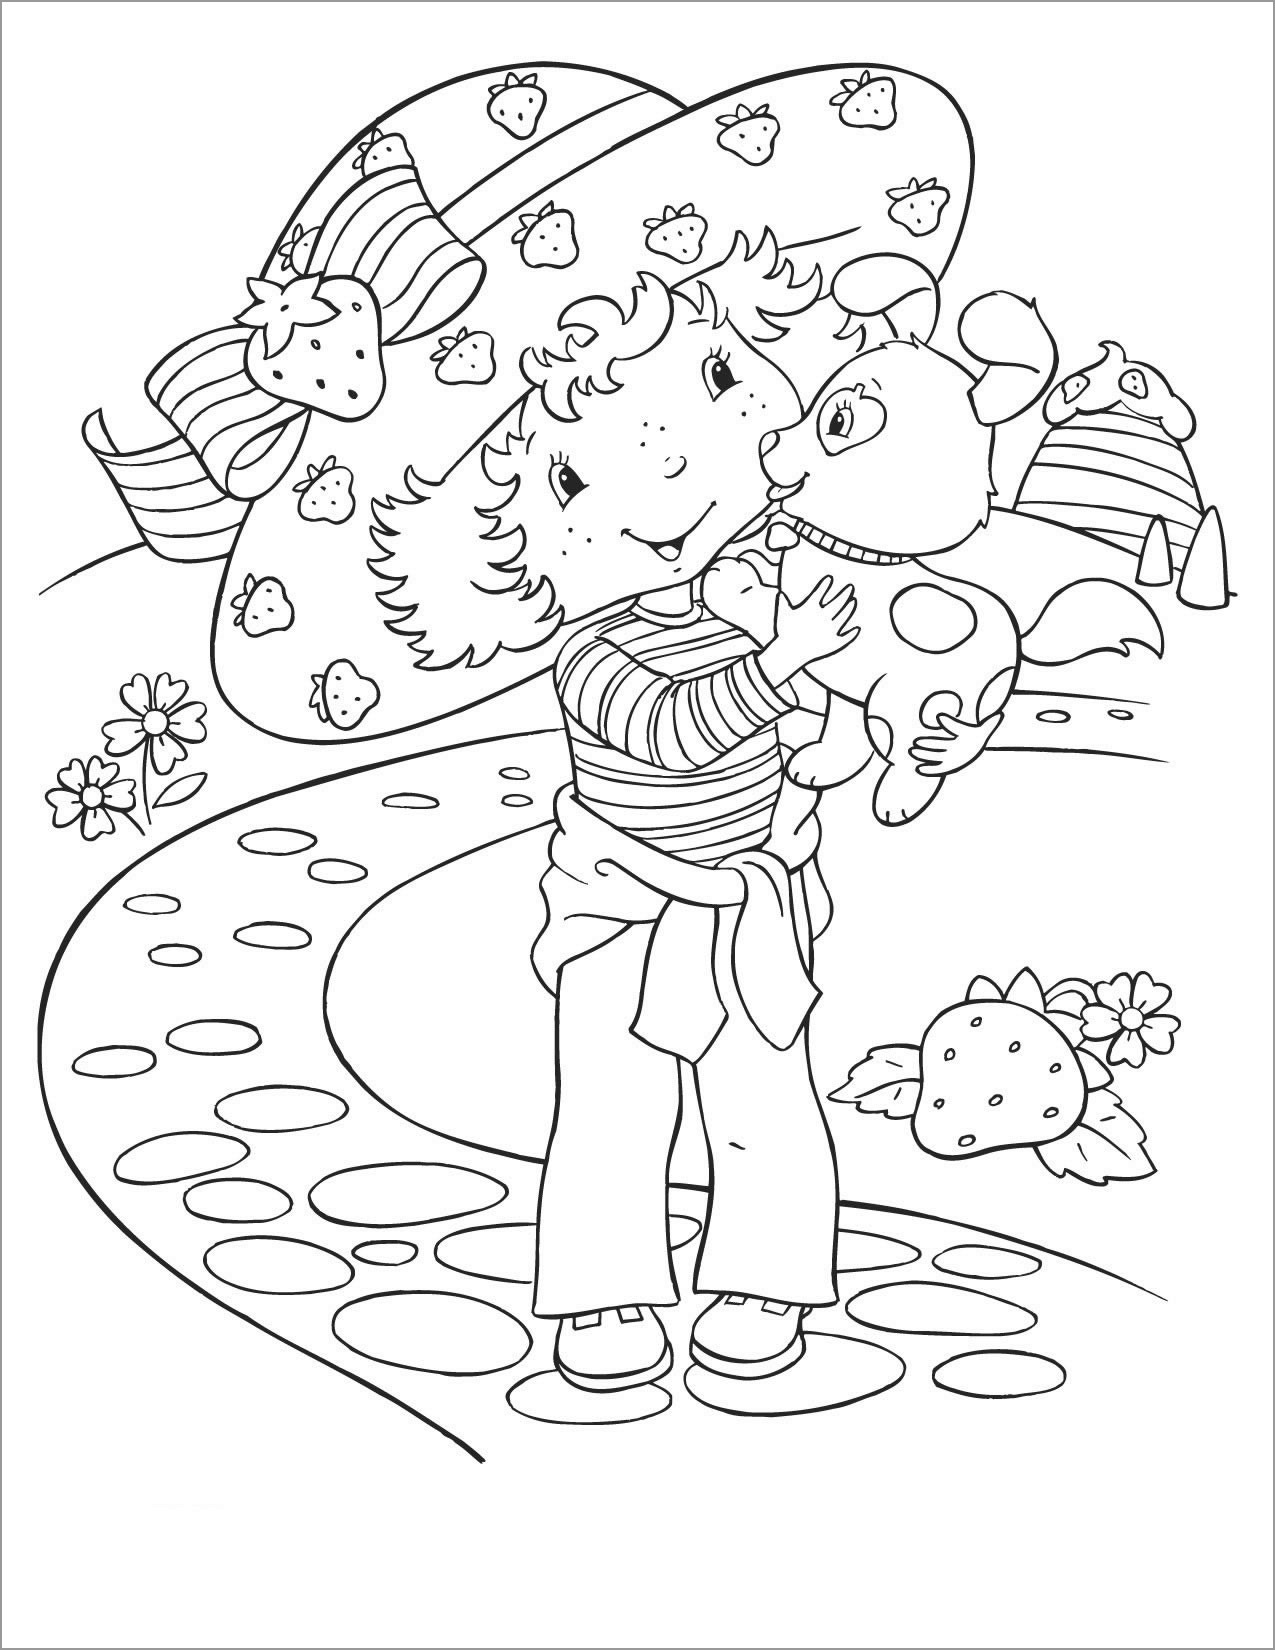 Old Strawberry Shortcake Puppy Coloring Pages